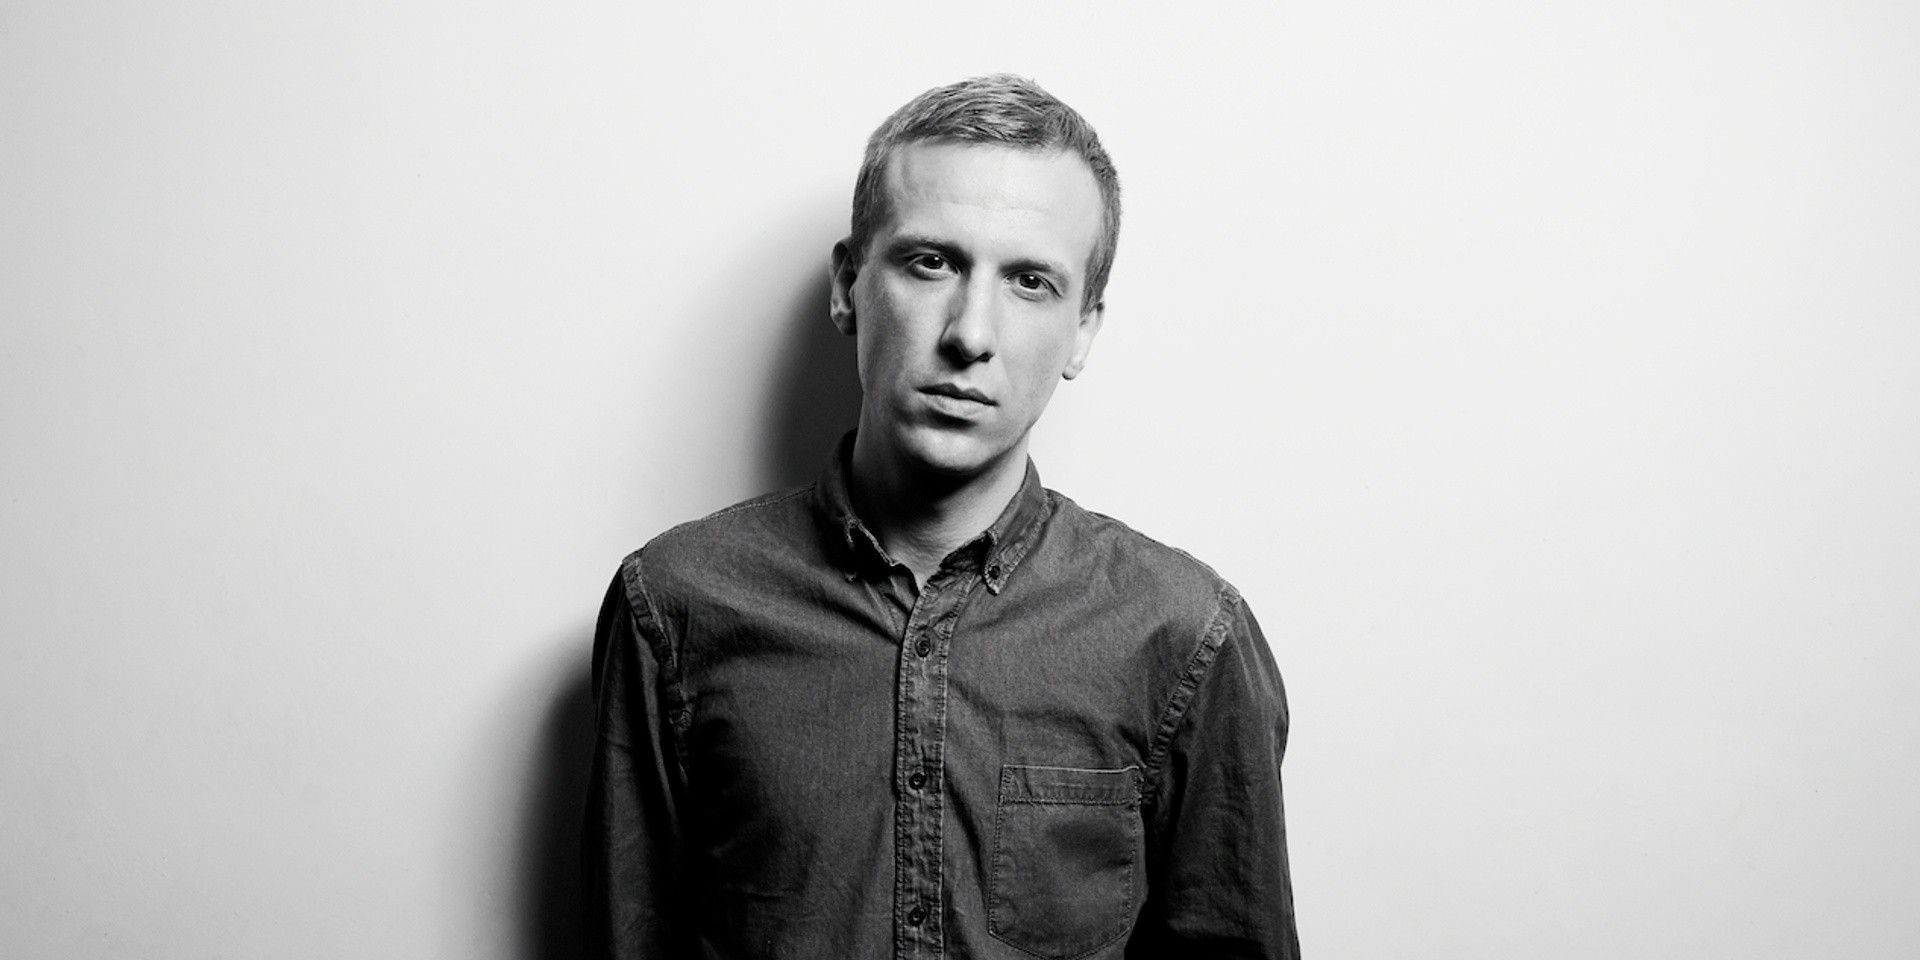 Ten Walls, making a comeback with his most personal release yet